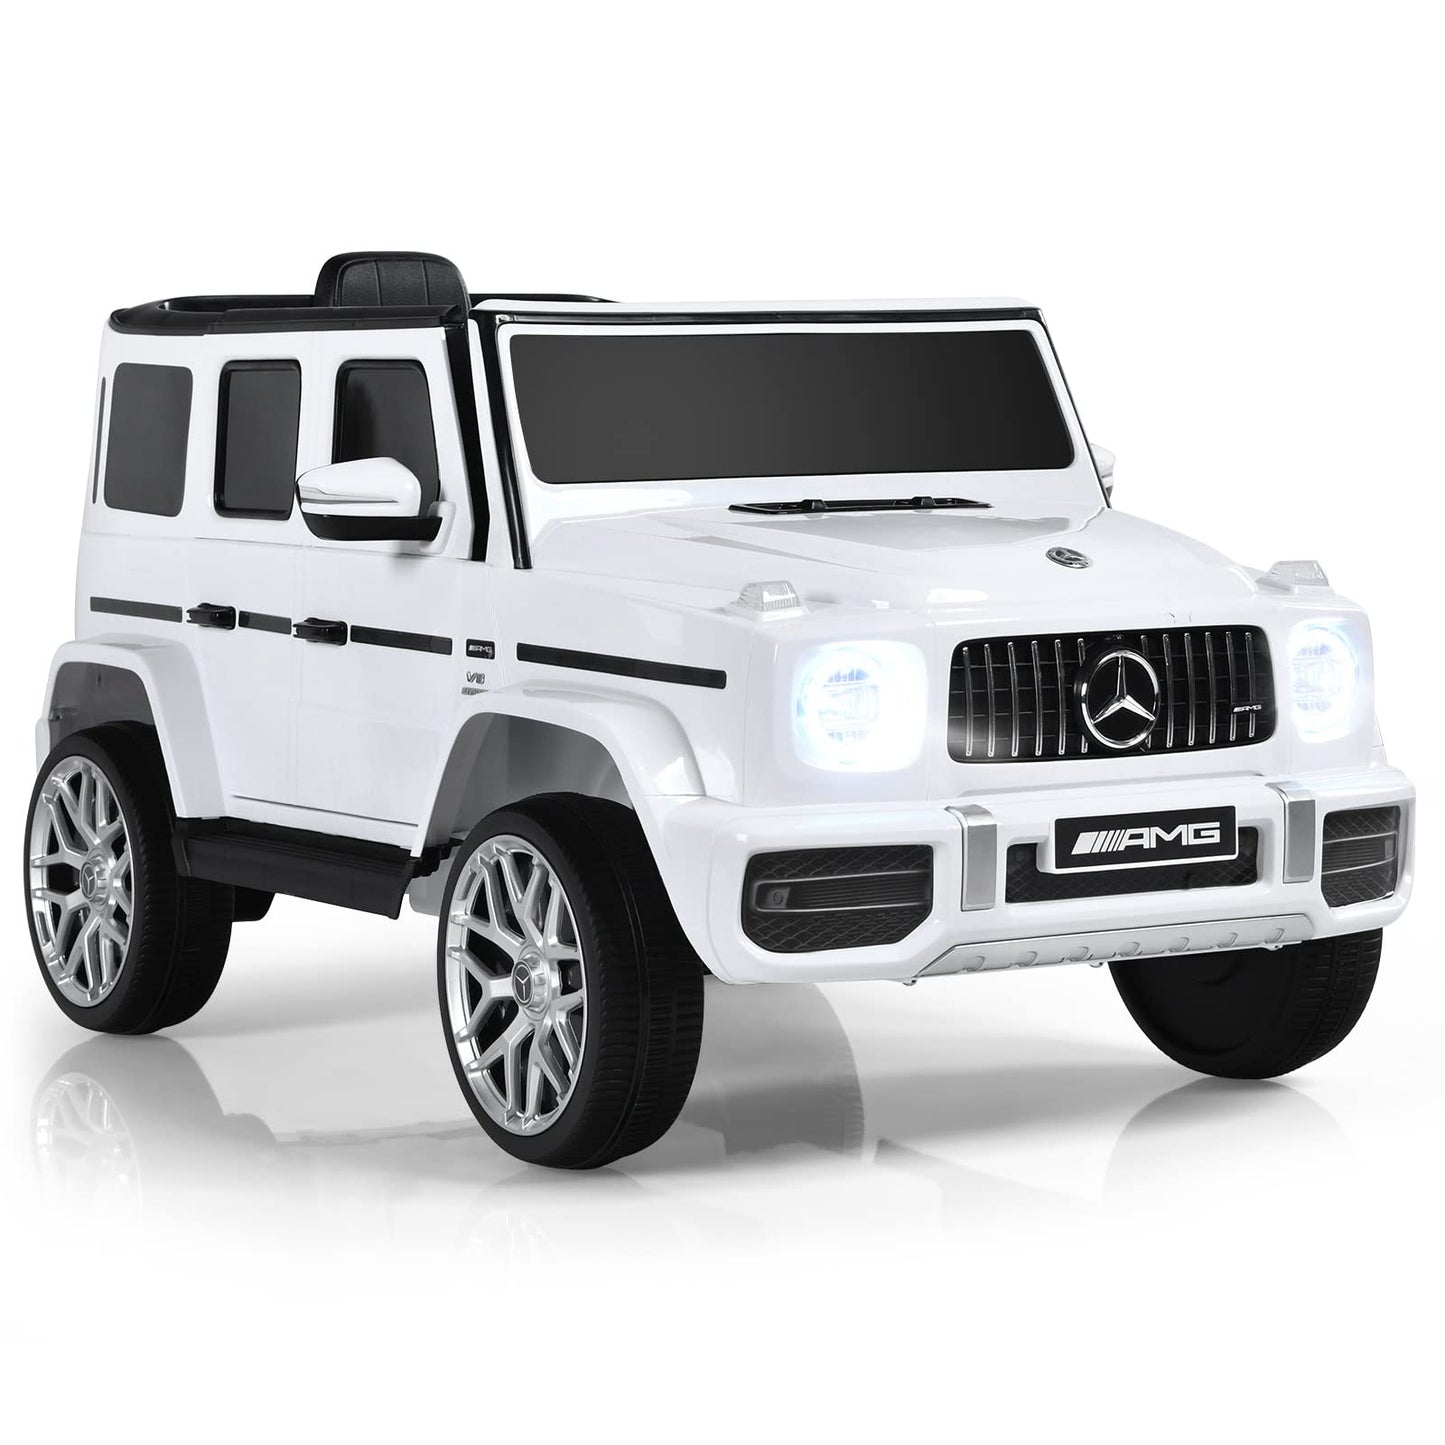 OLAKIDS 12V Kids Ride On Car, Licensed Mercedes Benz G63 Electric Vehicle with Remote Control, Double Open Doors, Music, Bluetooth, 2 Speeds, Wheels Suspension, Battery Powered Driving Toy OLAKIDS